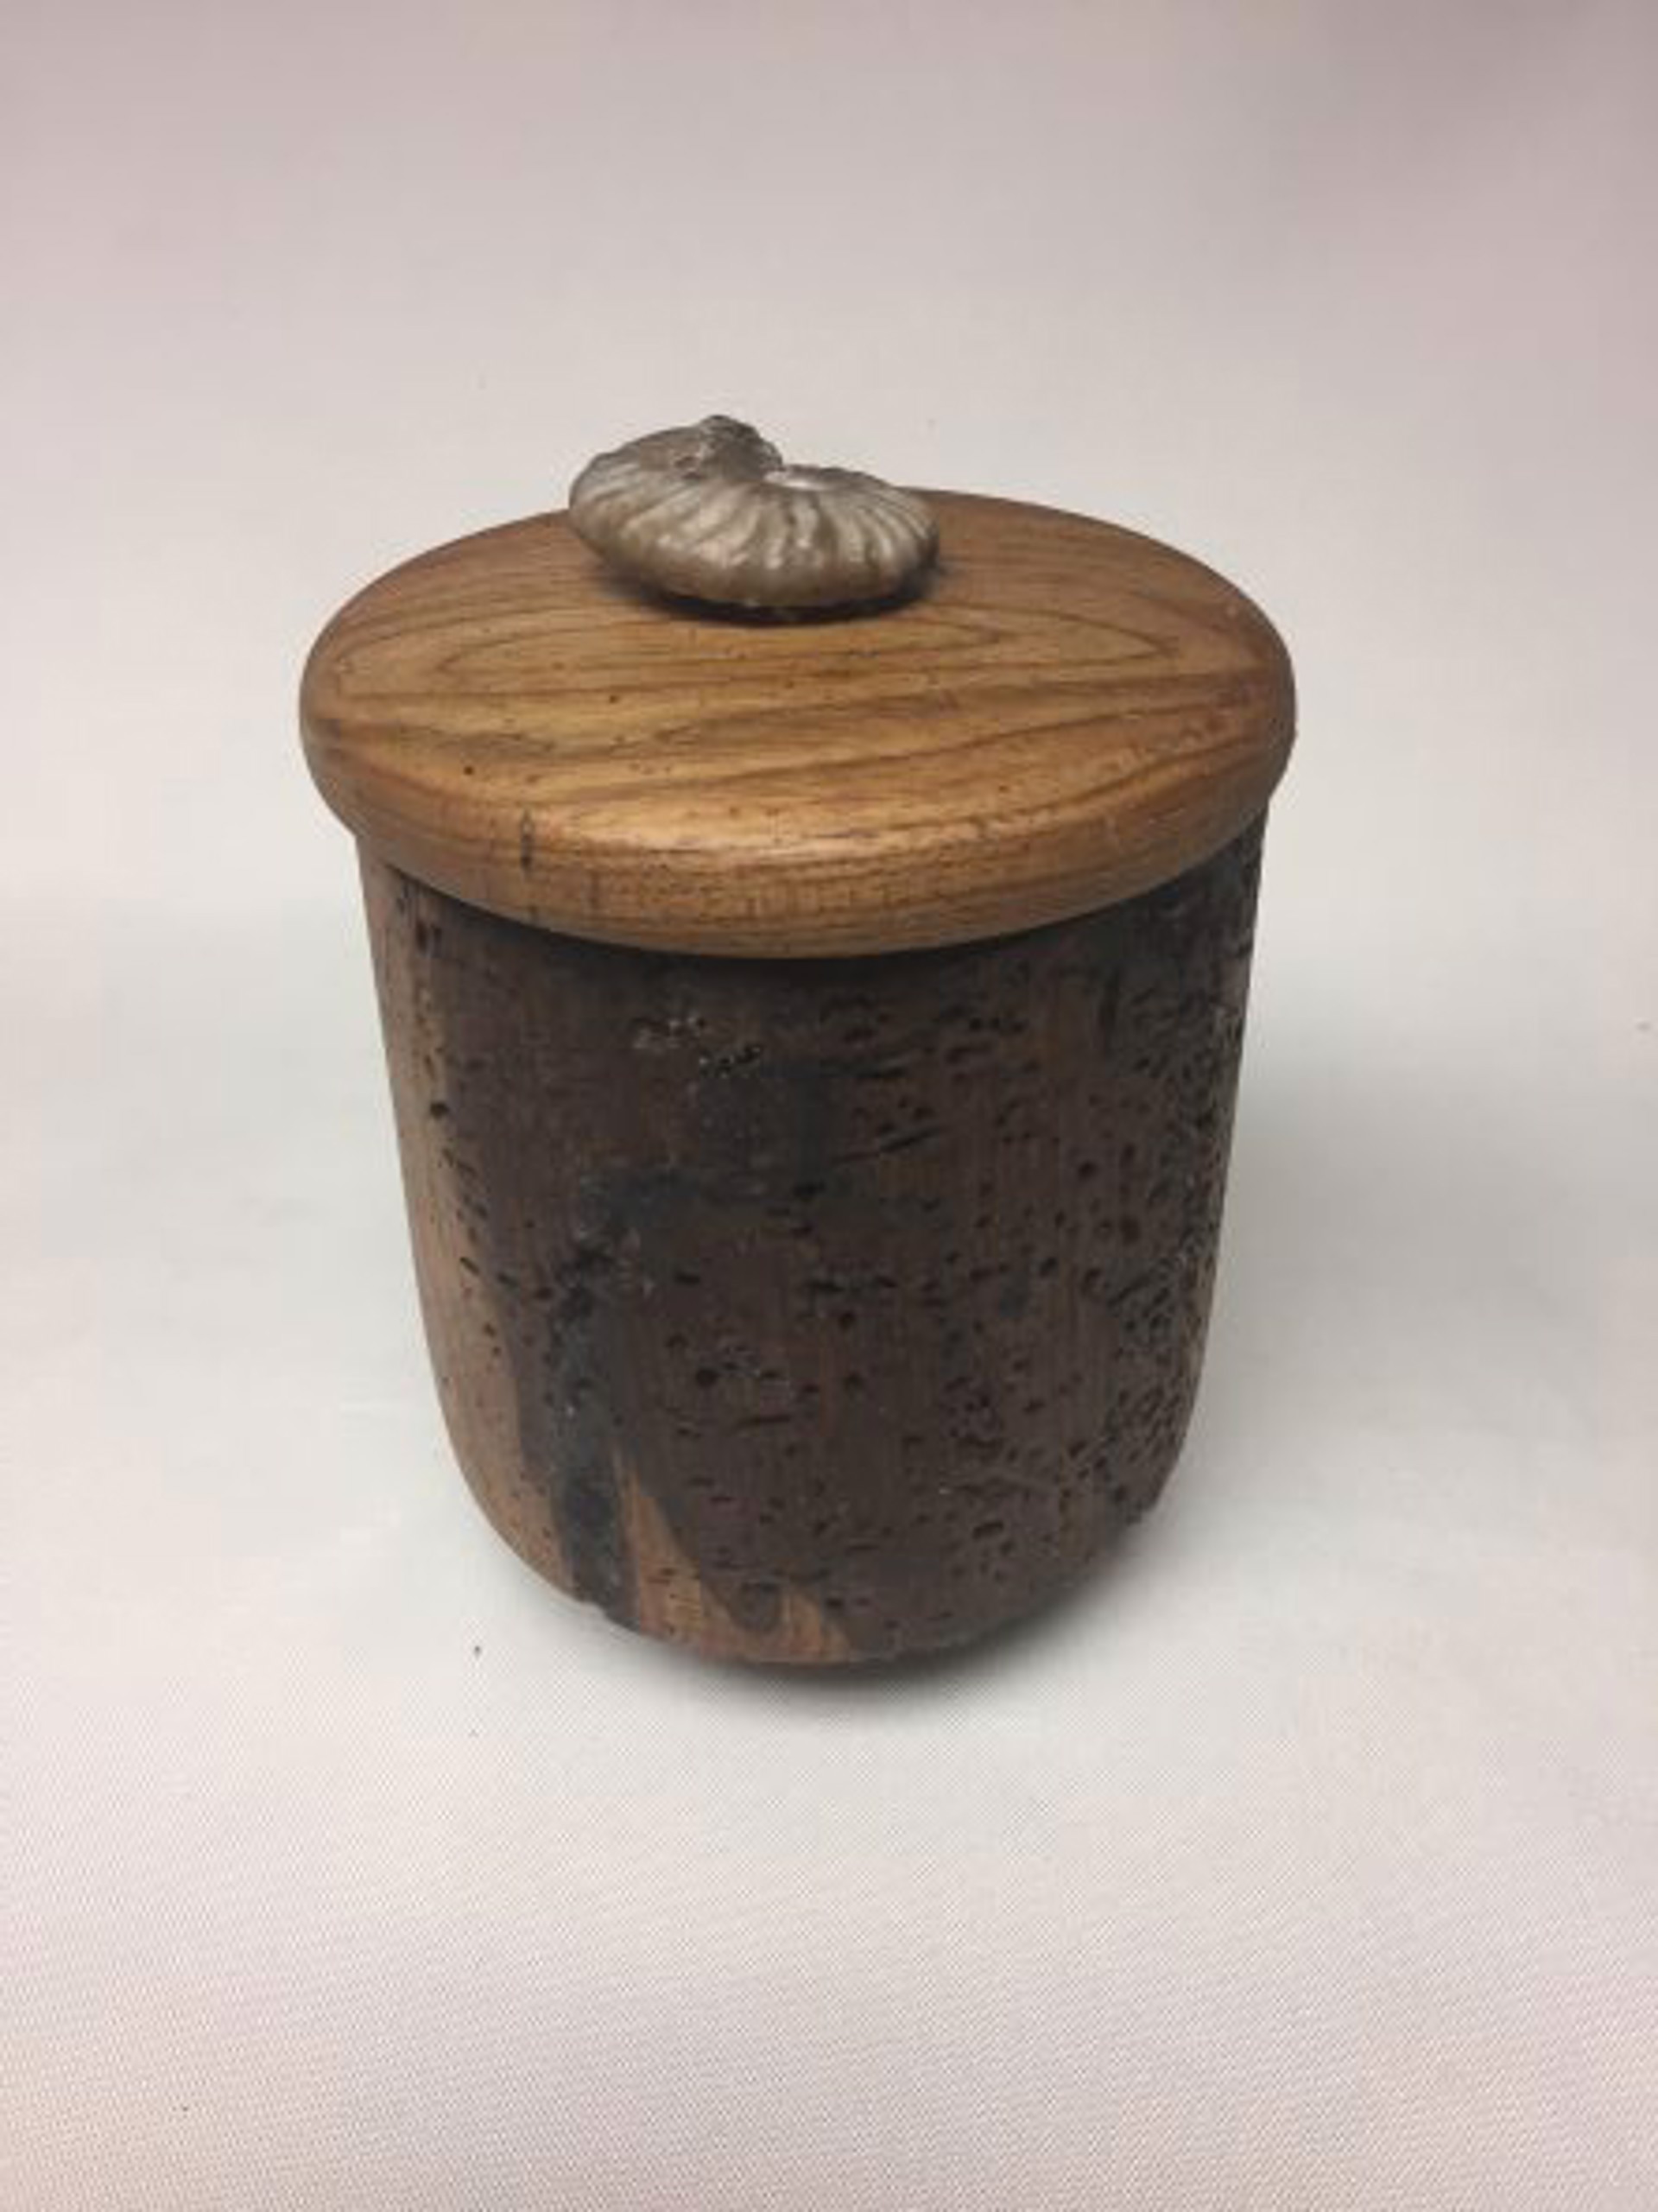 Turned Wood Jar W/Lid 21-105 by Rick Squires